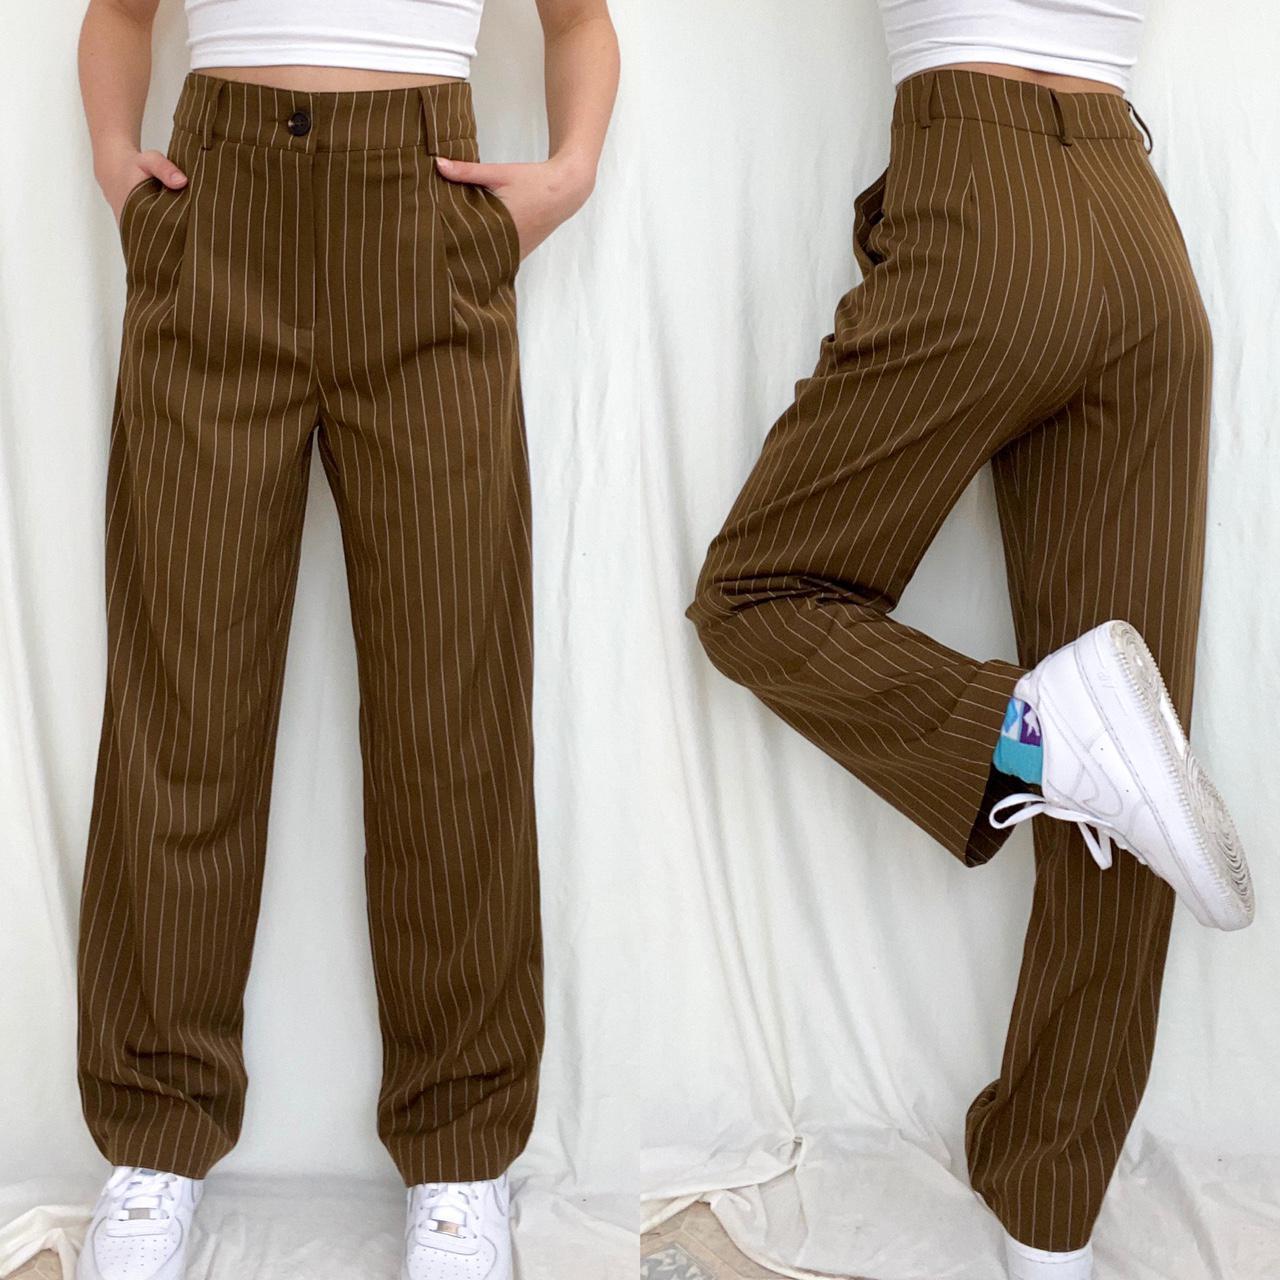 Product Image 1 - Brown Pinstripe Wide Leg Trousers

Flowy